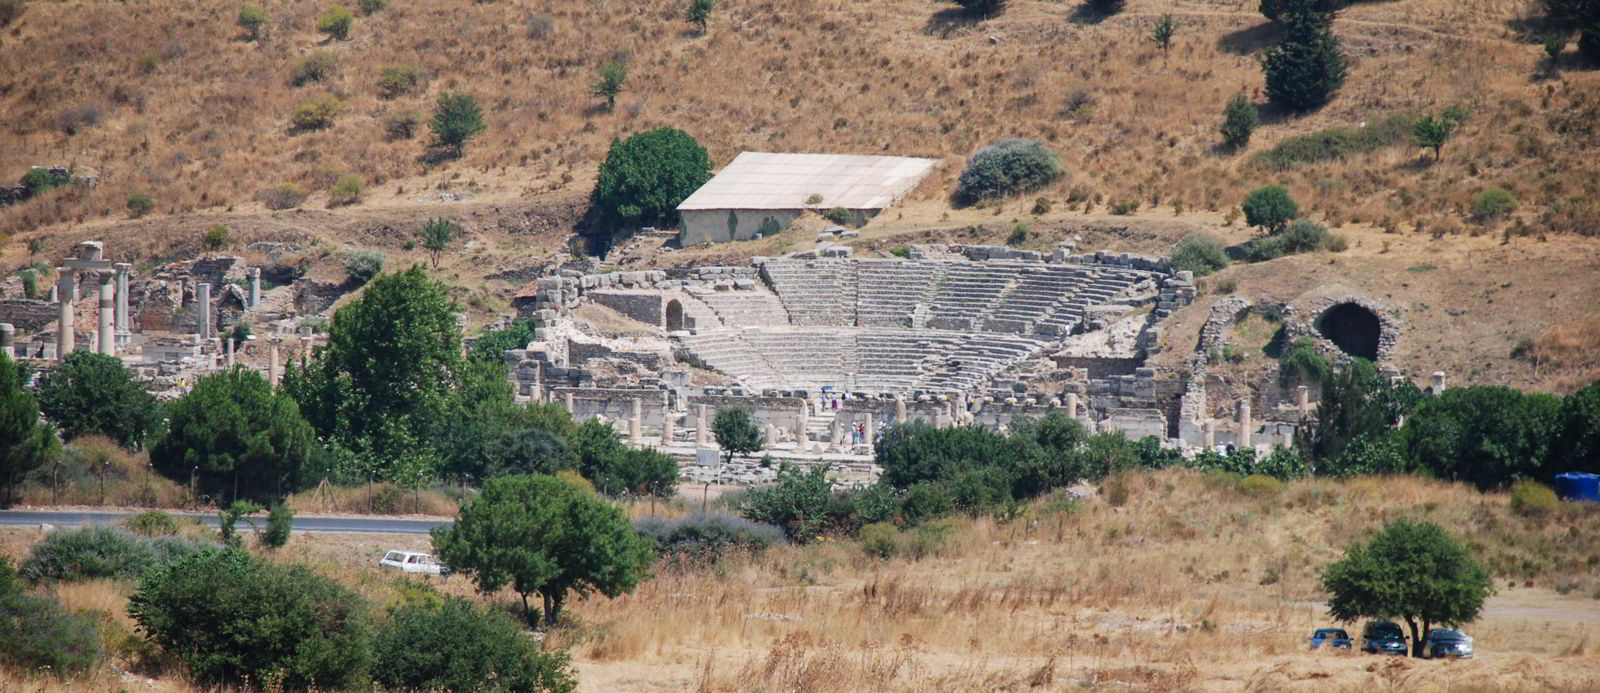 An image of the Ephesus ruins seen from a distance on an Ephesus tour.